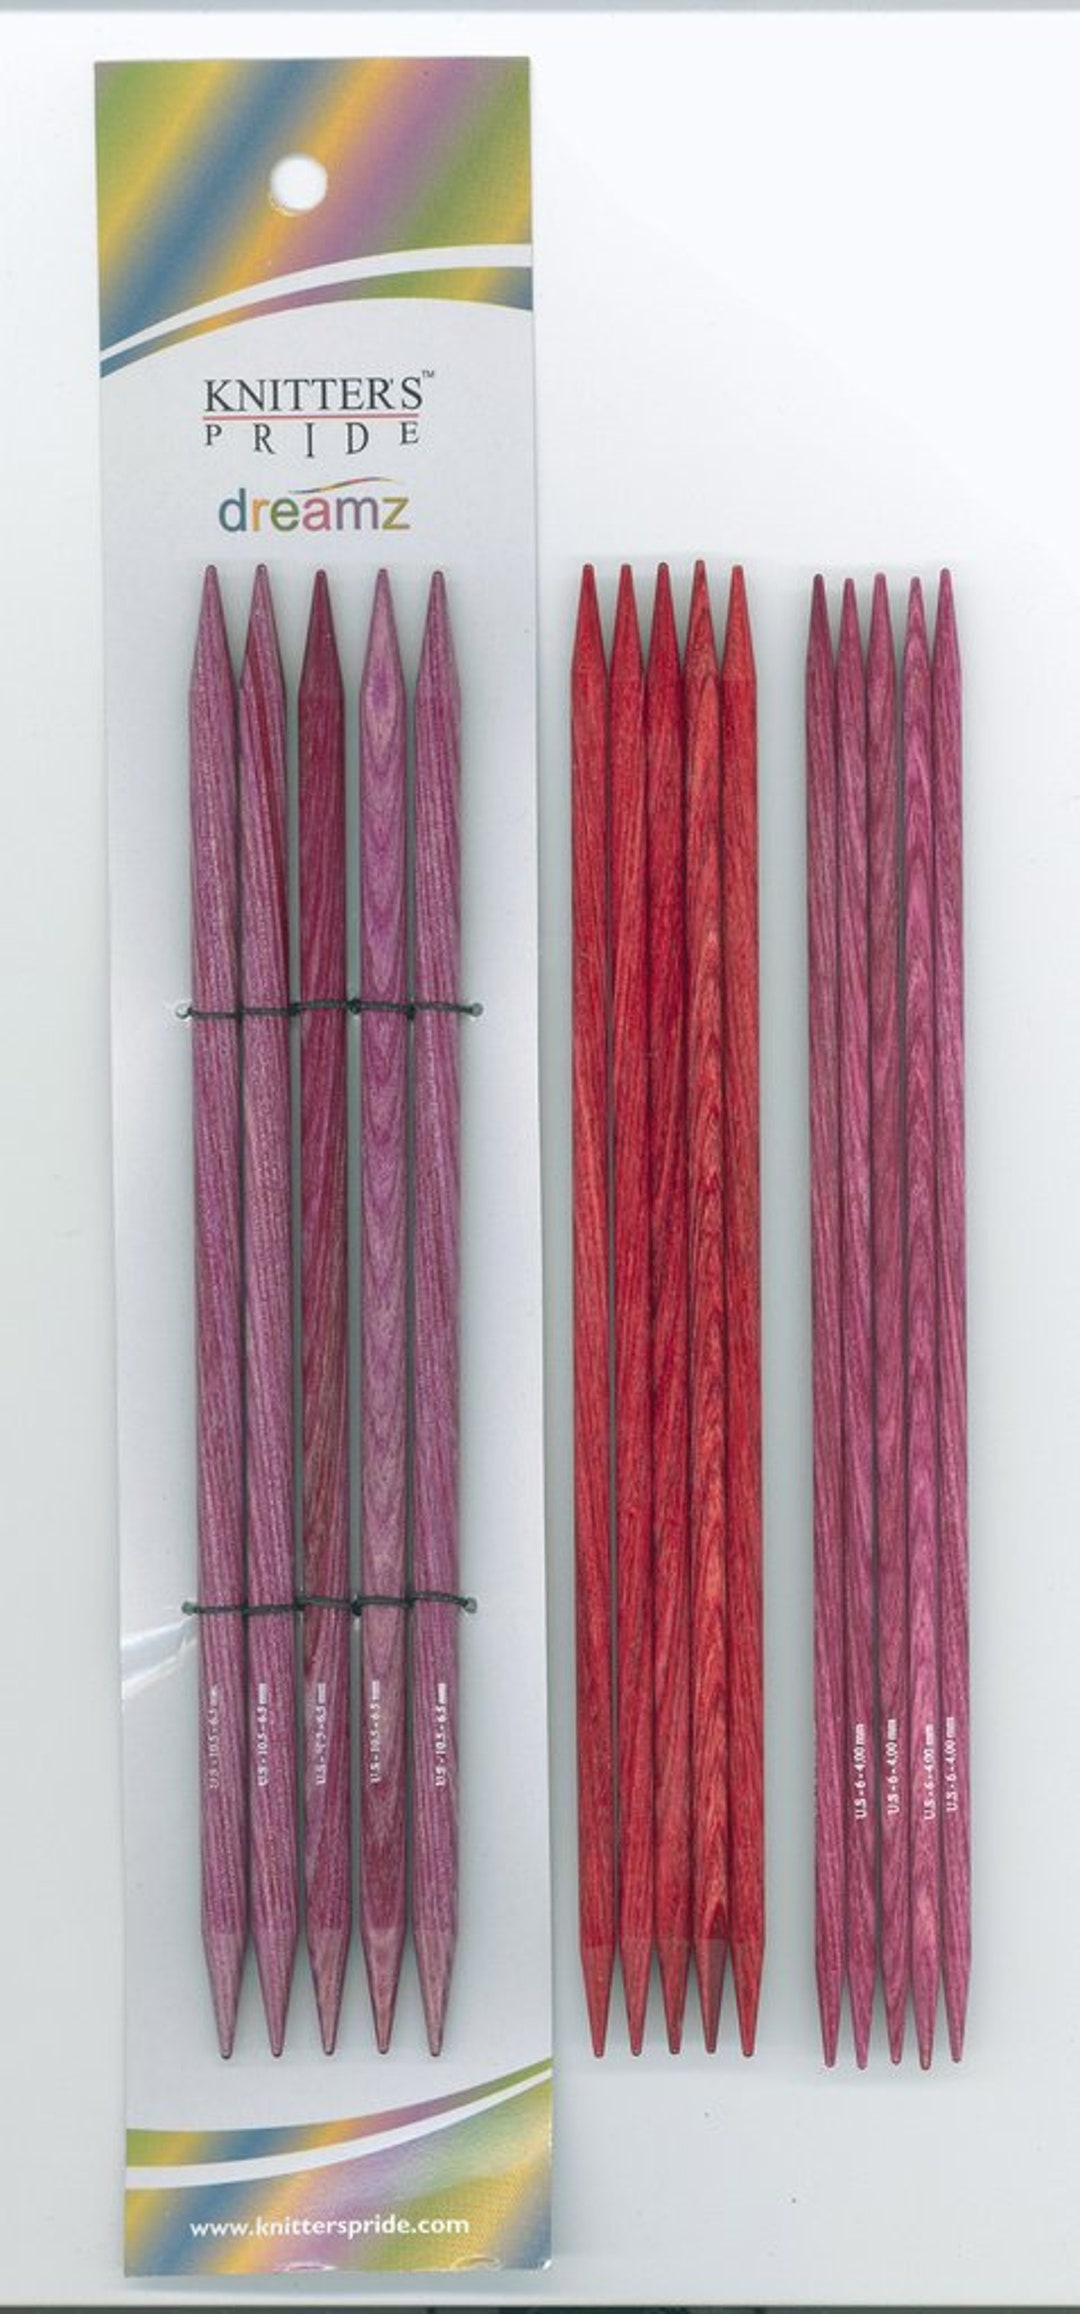 Dreamz KP 10 Inch Wood Knitting Needles Assorted Sizes Available